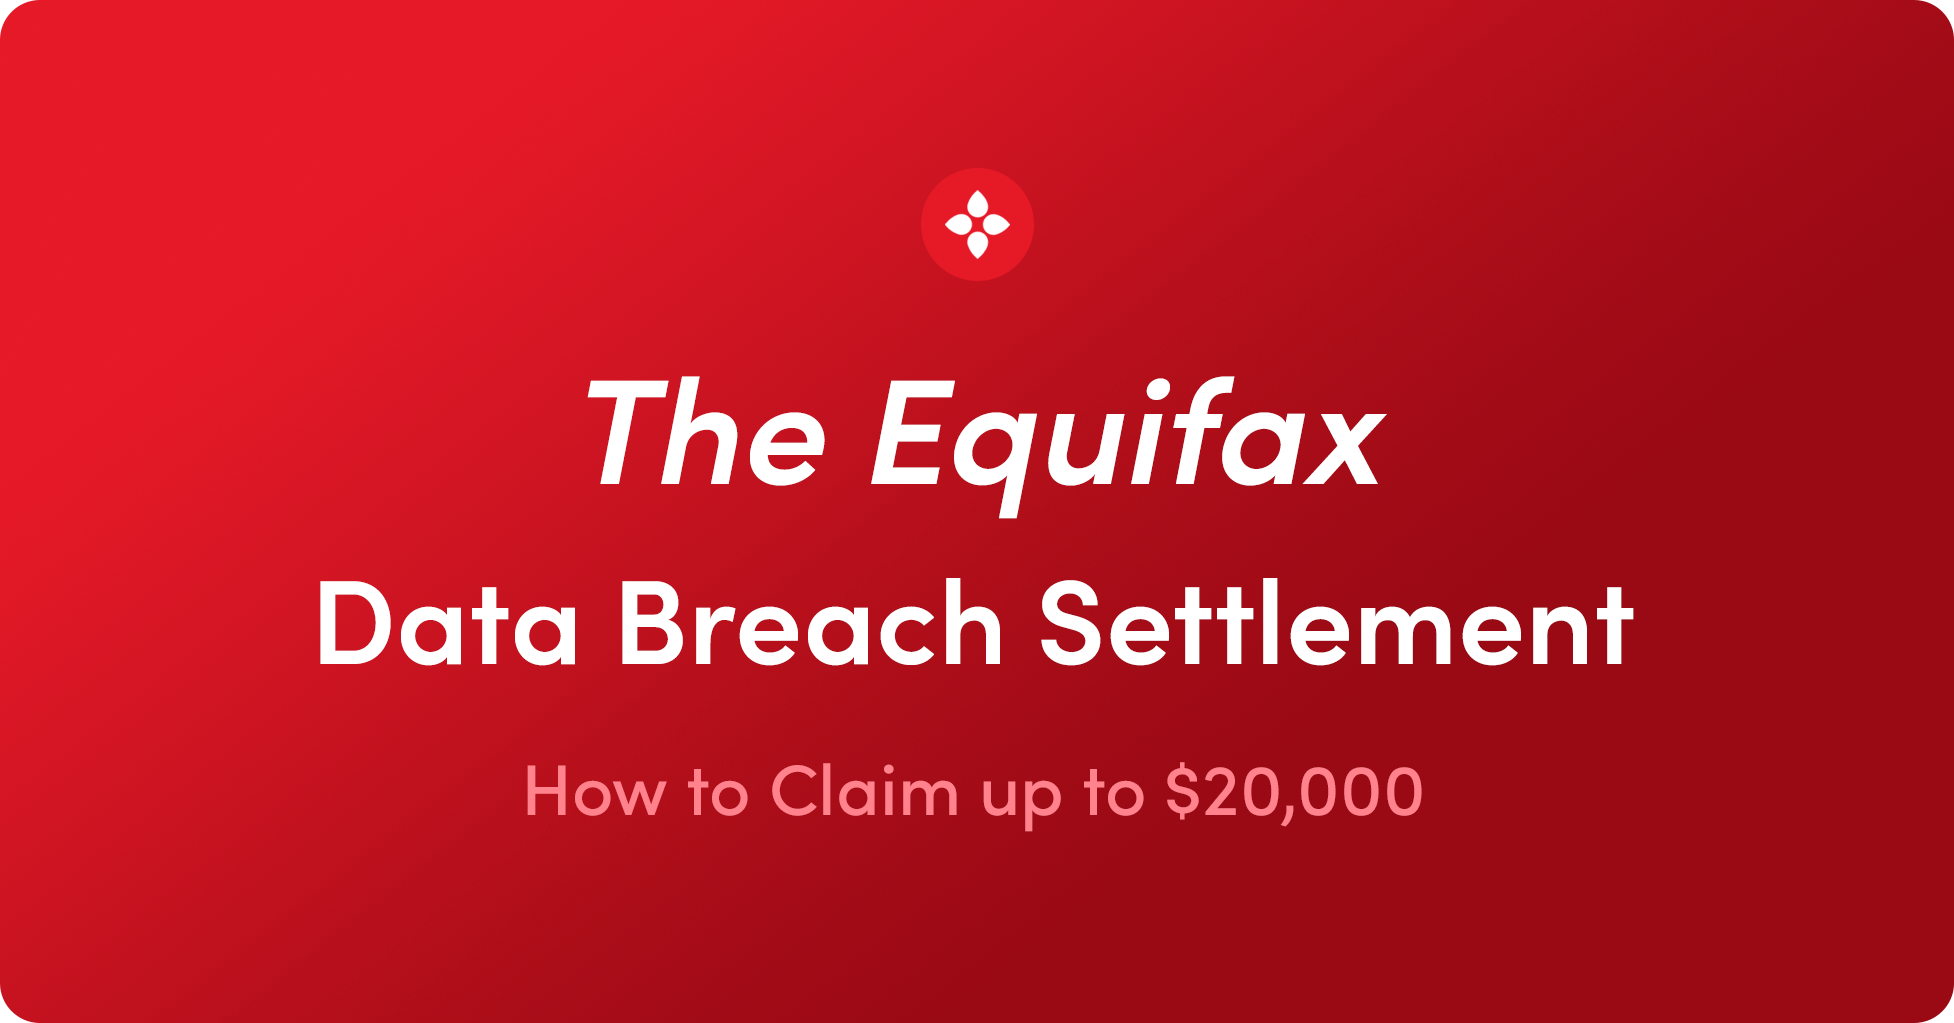 What You Need to Know About the Equifax Data Breach Settlement